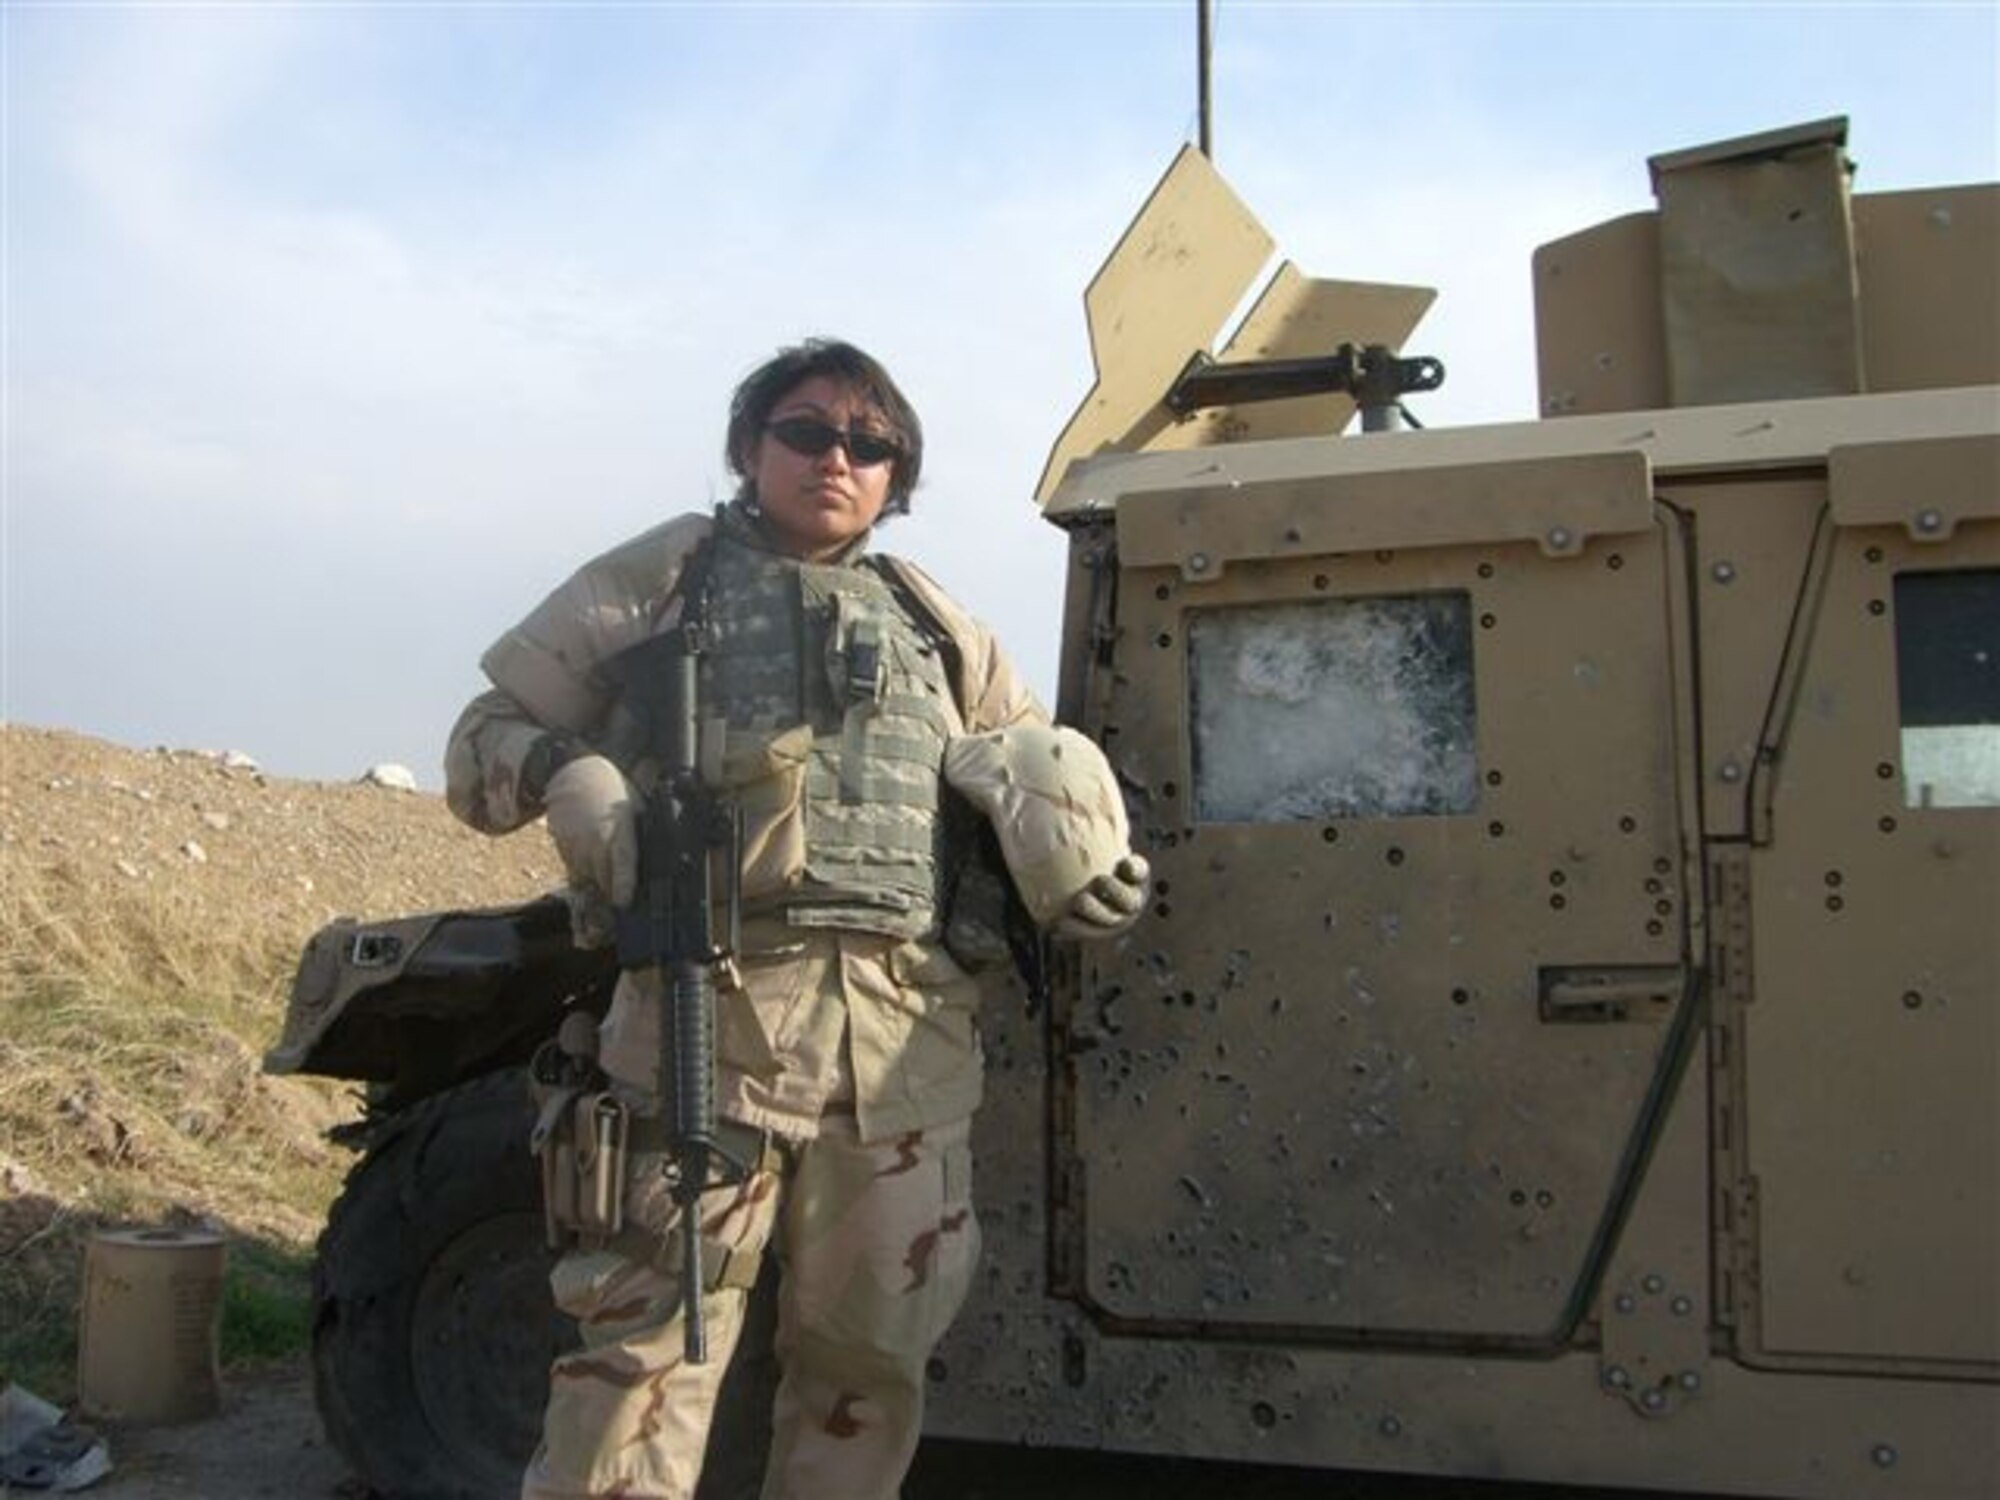 Staff Sgt. Aime Hart, 56th Operations Support Squadron intelligence analyst, pictured here while still in Iraq, will receive a second Purple Heart in a ceremony today.